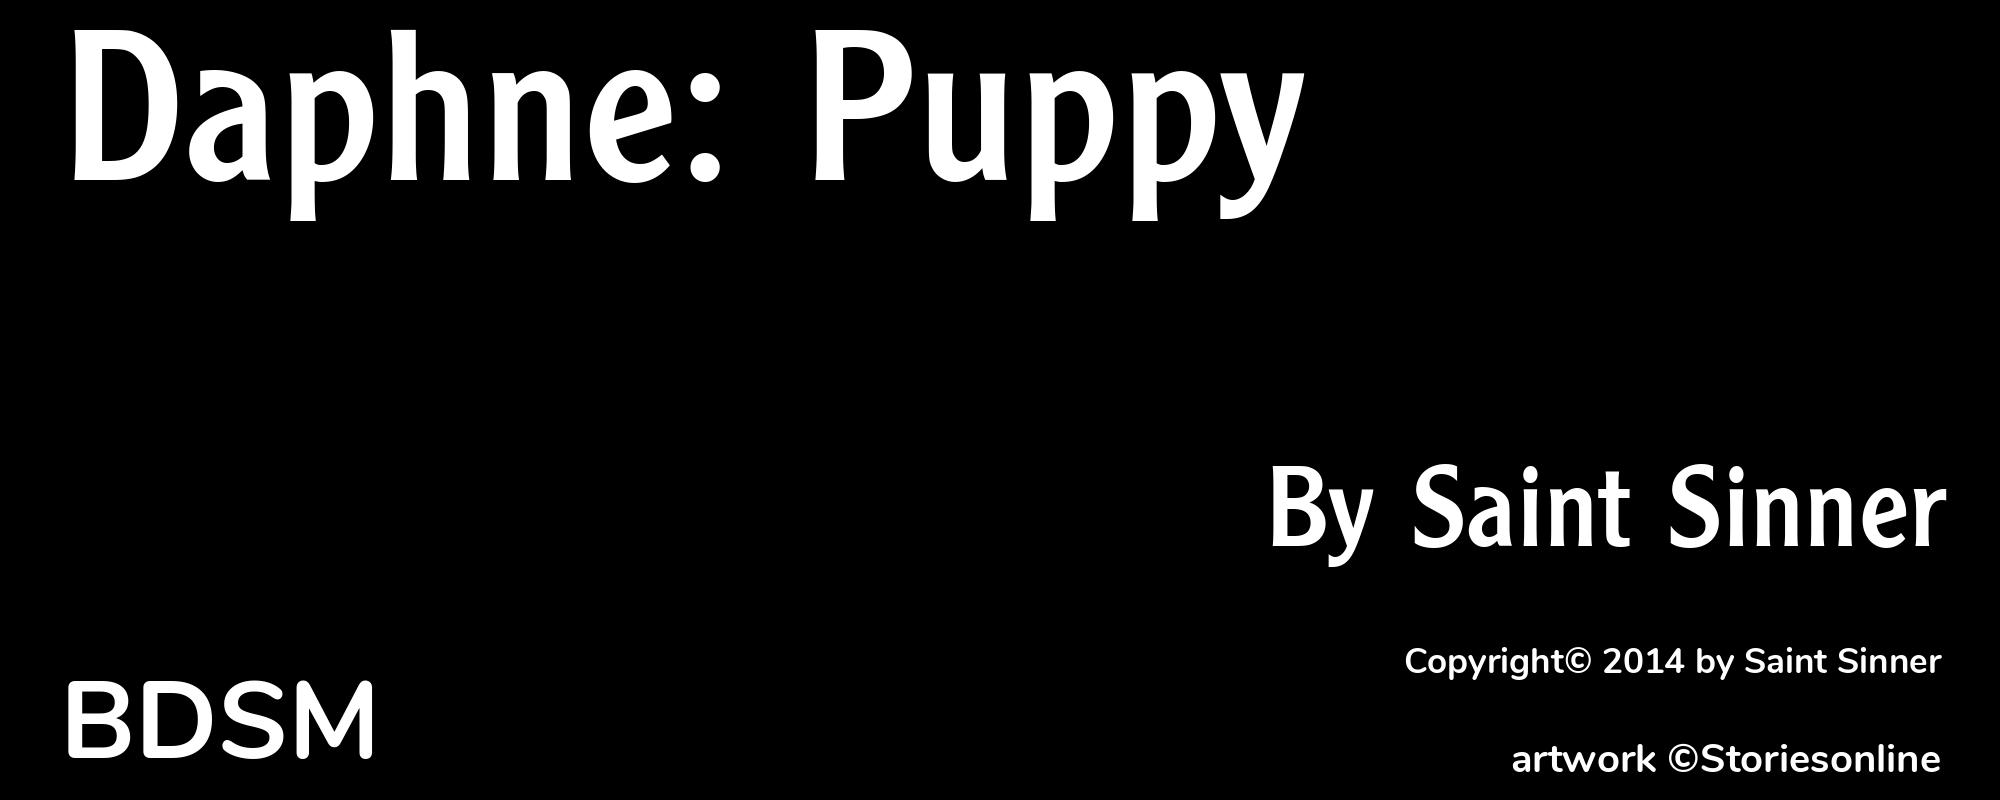 Daphne: Puppy - Cover